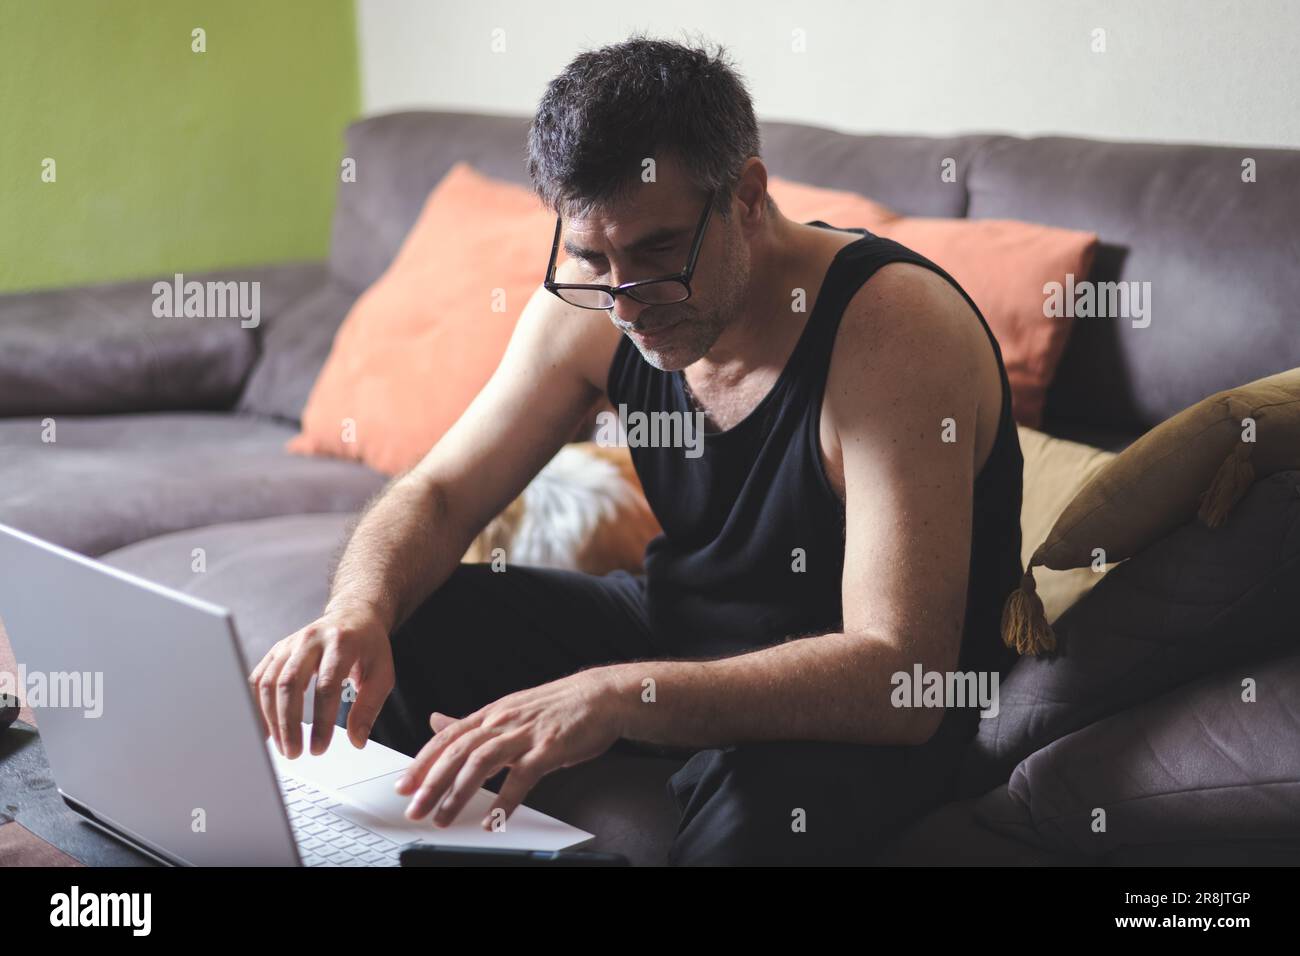 Contemporary image of a middle-aged man with dark hair working from home, his face reflecting determination and focus as he uses his laptop Stock Photo